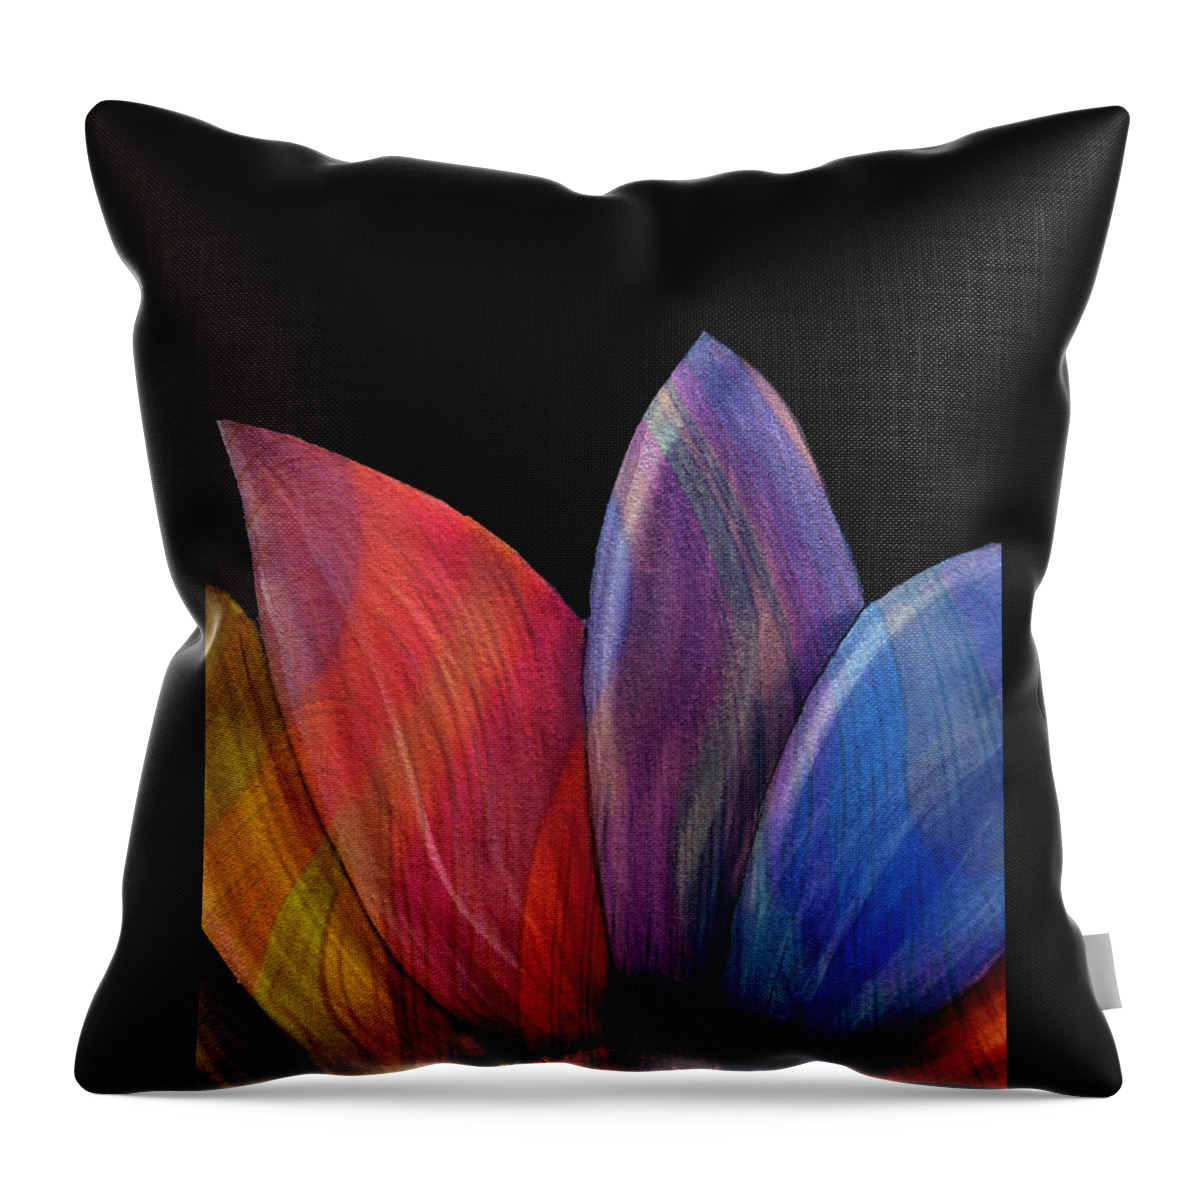 Abstract Throw Pillow featuring the digital art A Daisy's Elegance - Abstract by Ronald Mills